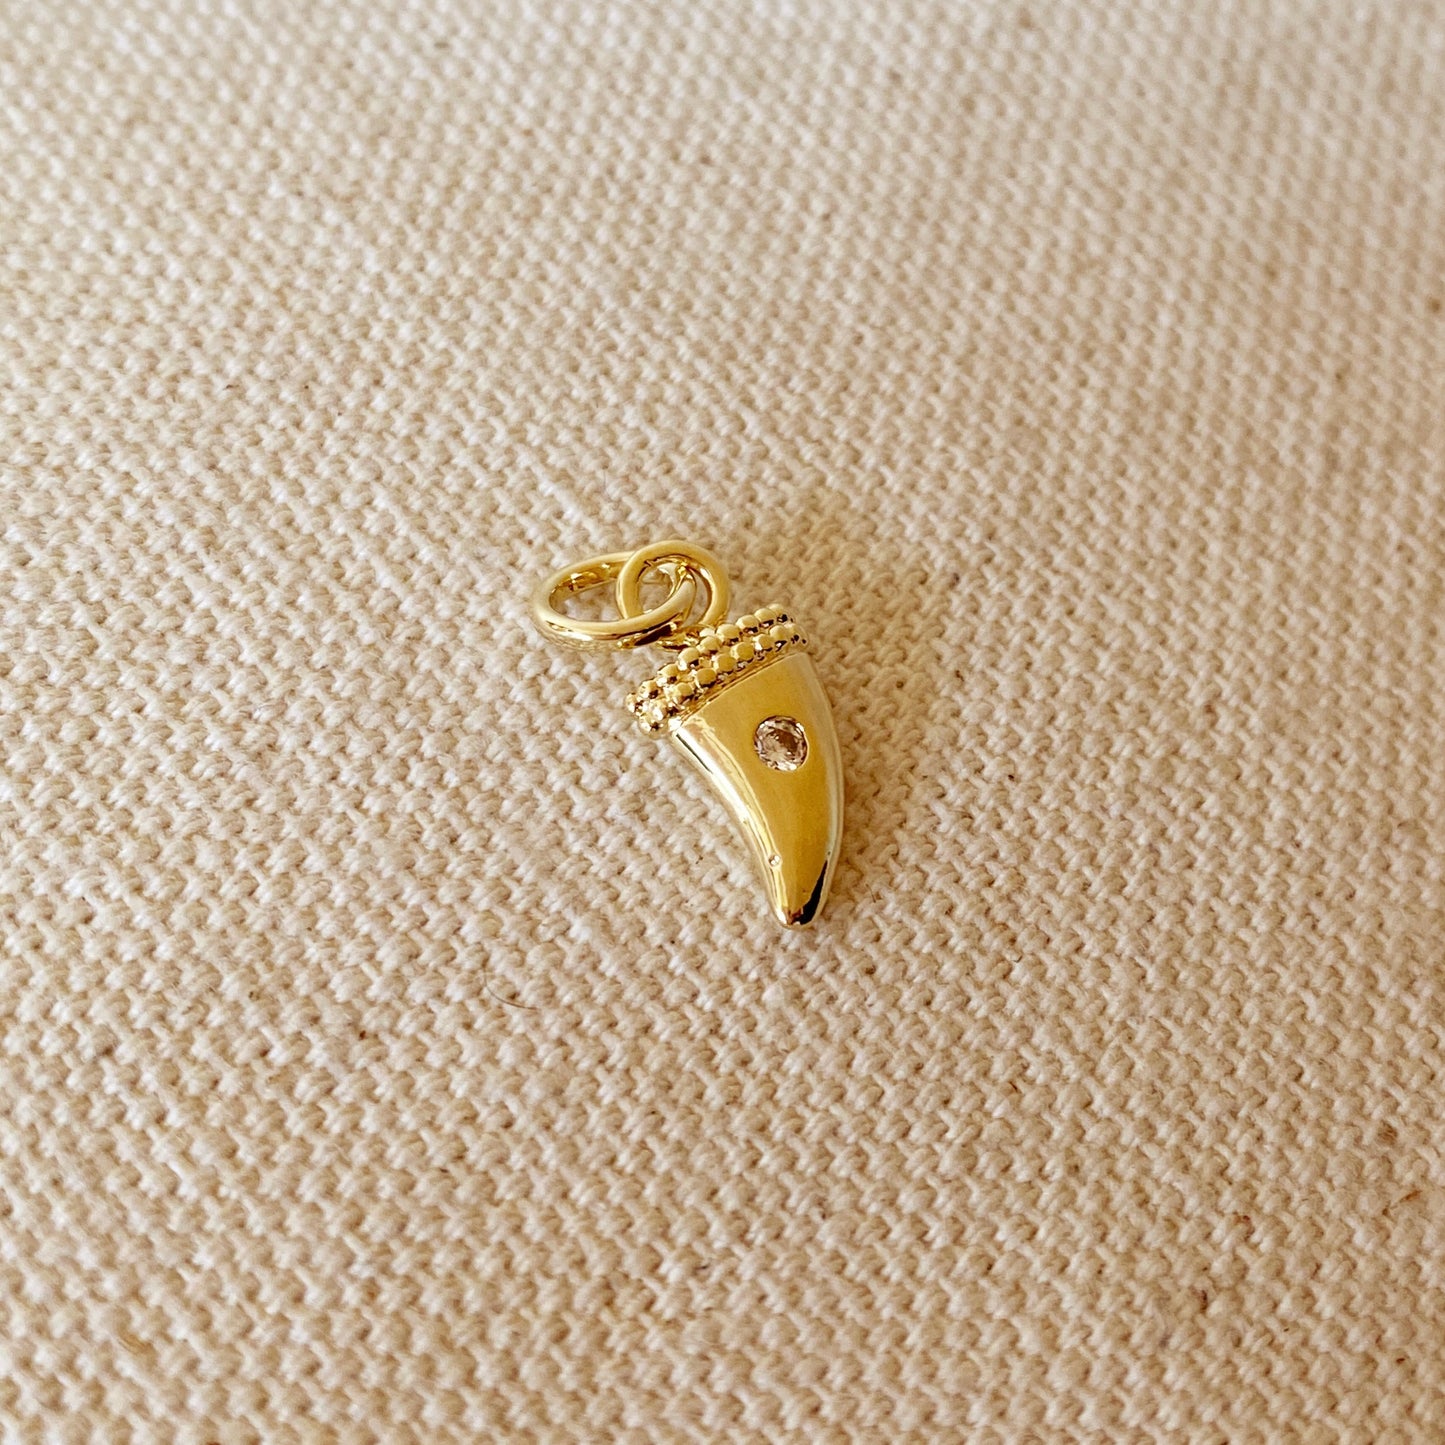 18k Gold Filled Mini Tusk Pendant With Cubic Zirconia Stone